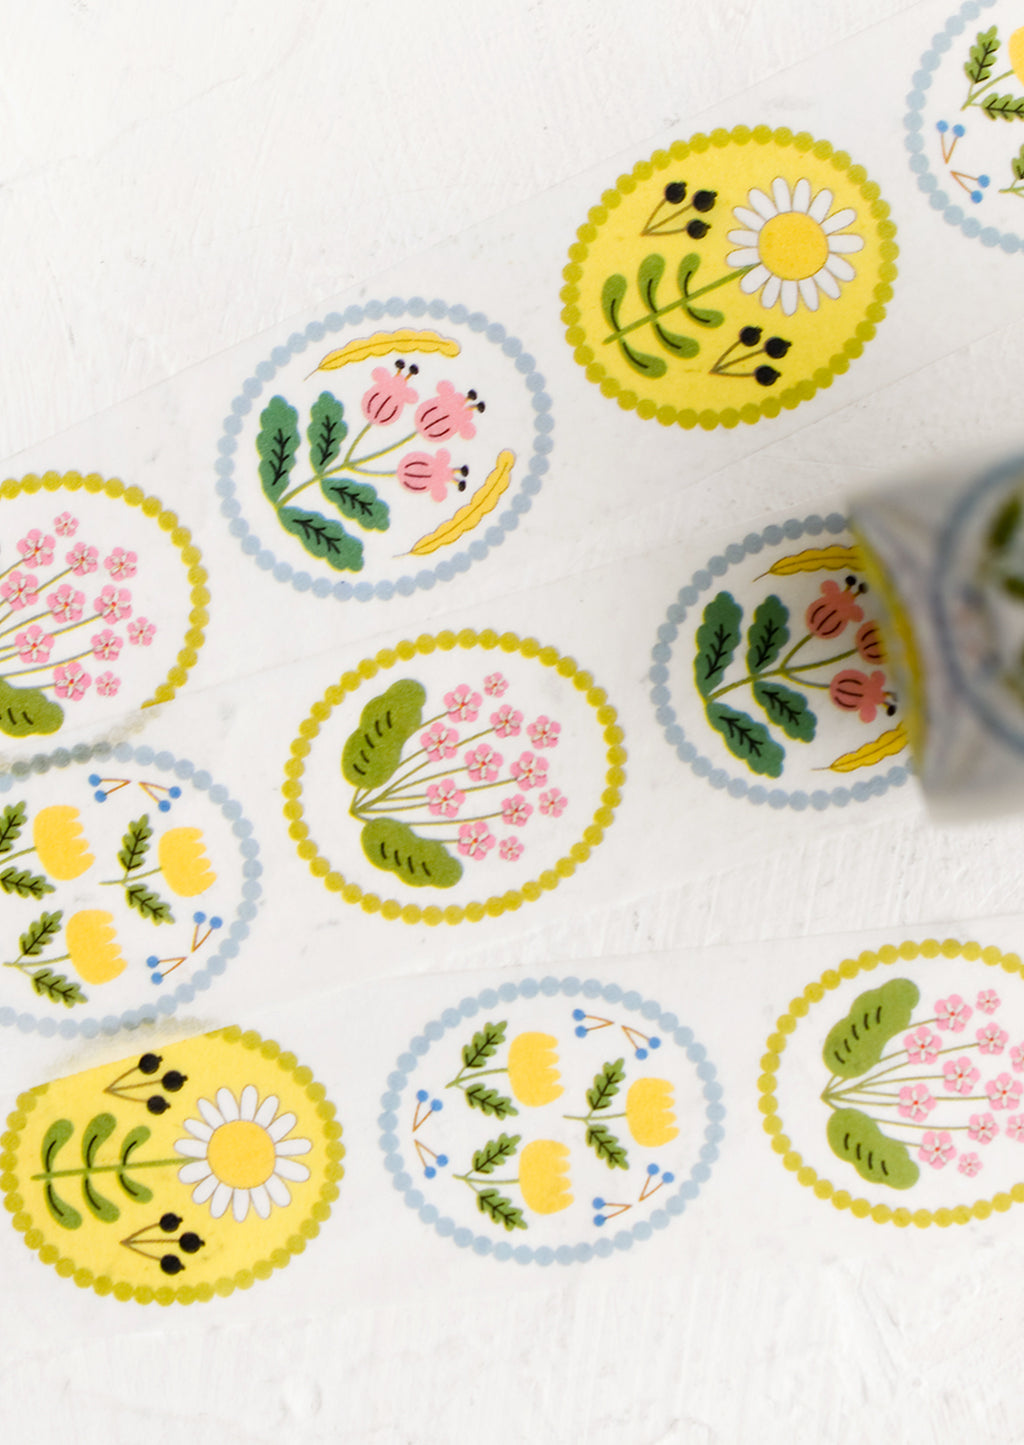 1: Pastel floral print washi tape in oval border shape.